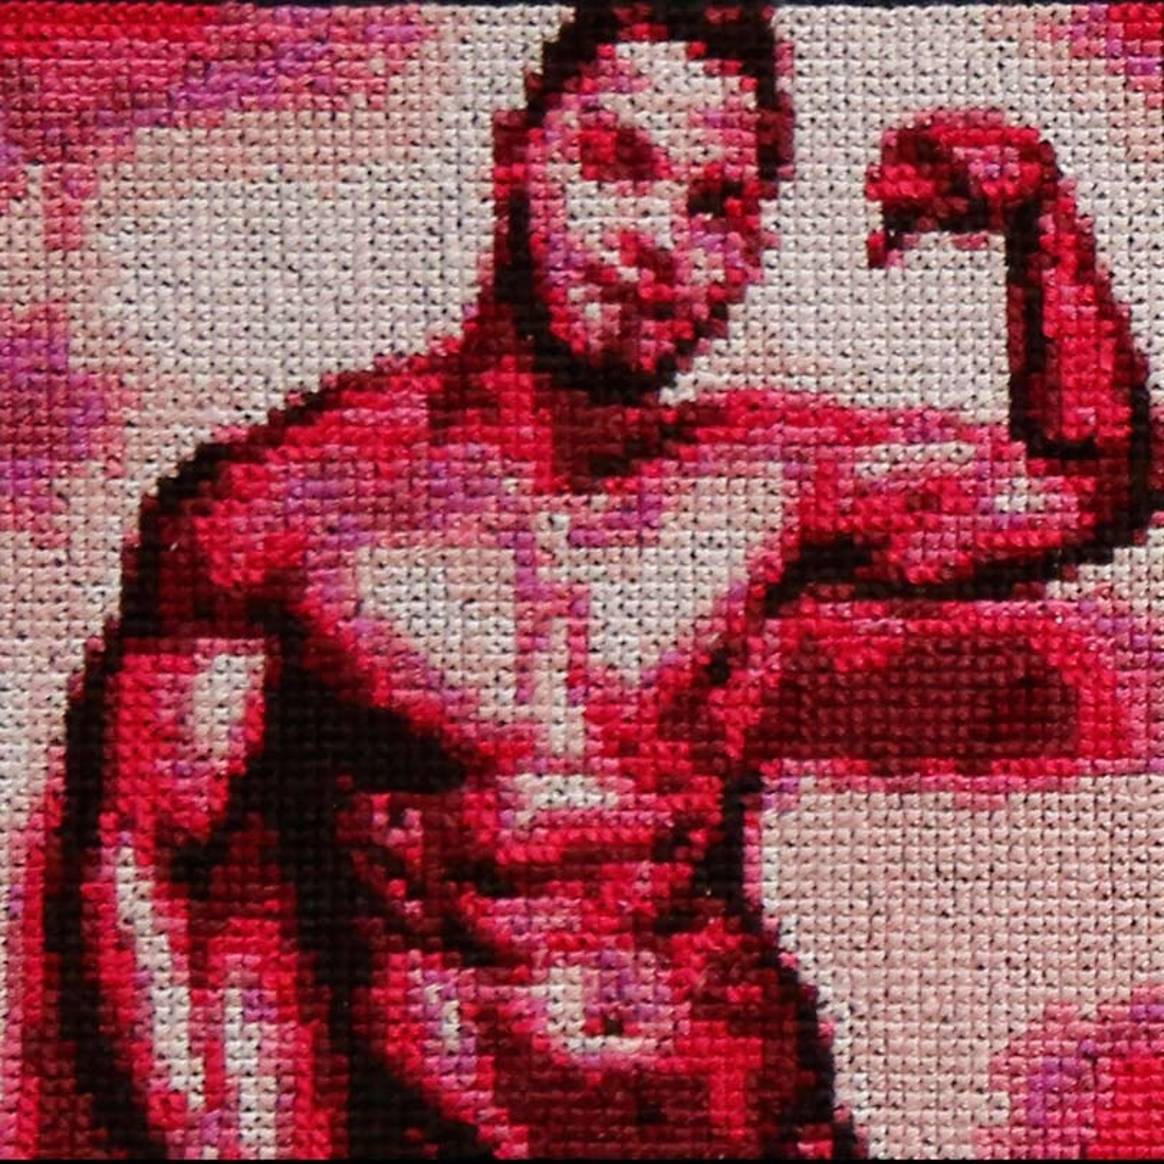 Craftsman celebrates the age-old power of cross stitch